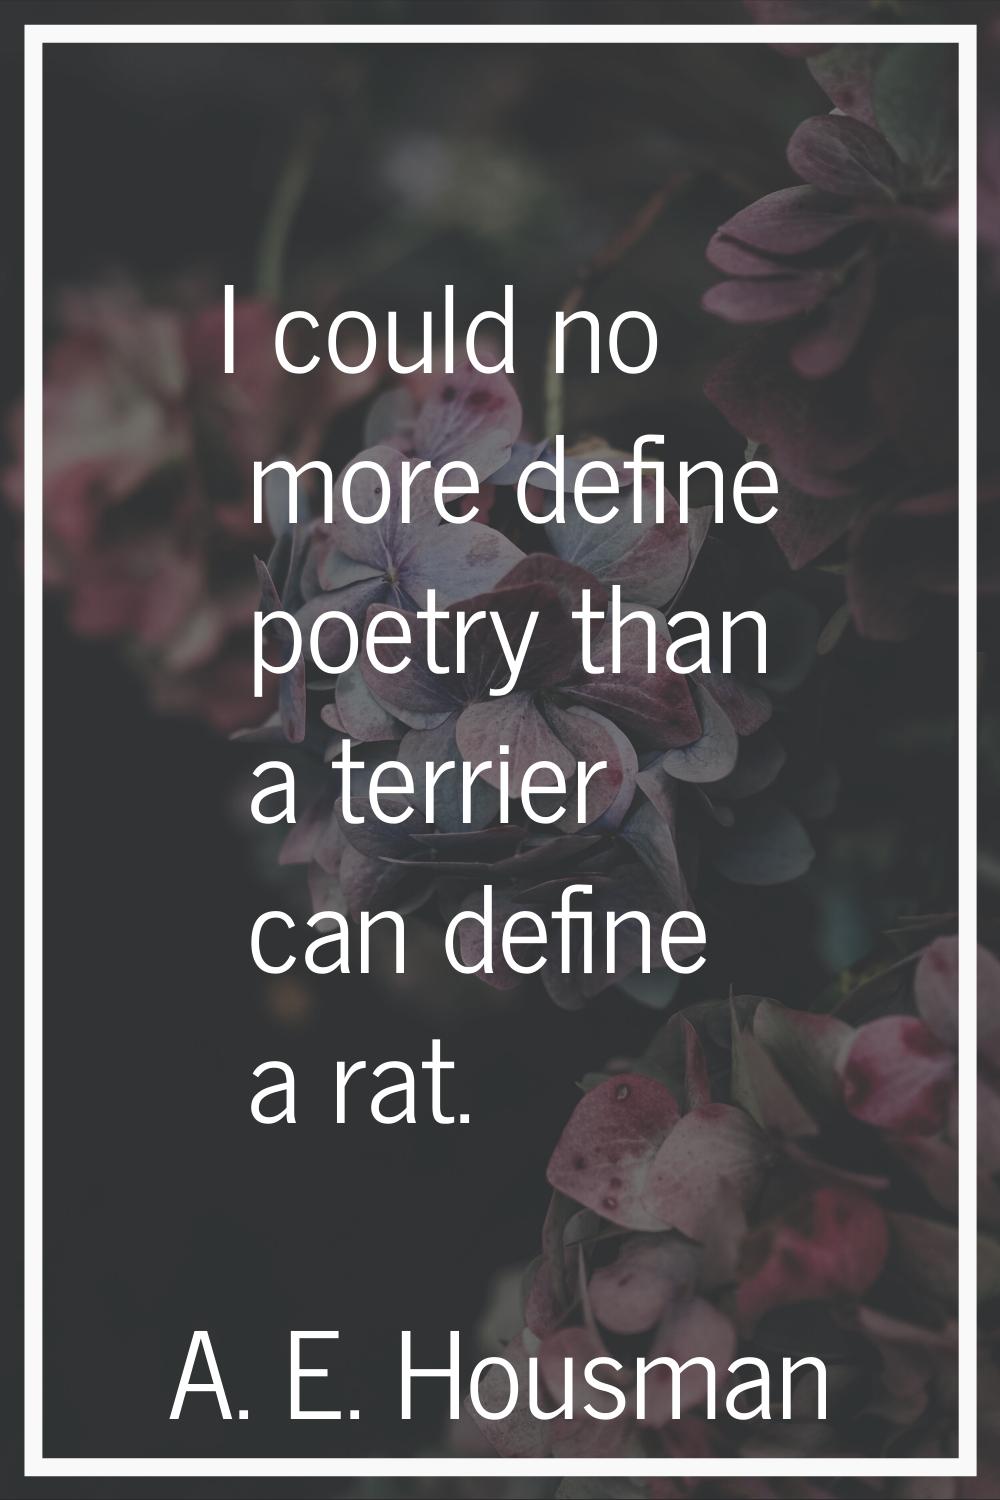 I could no more define poetry than a terrier can define a rat.